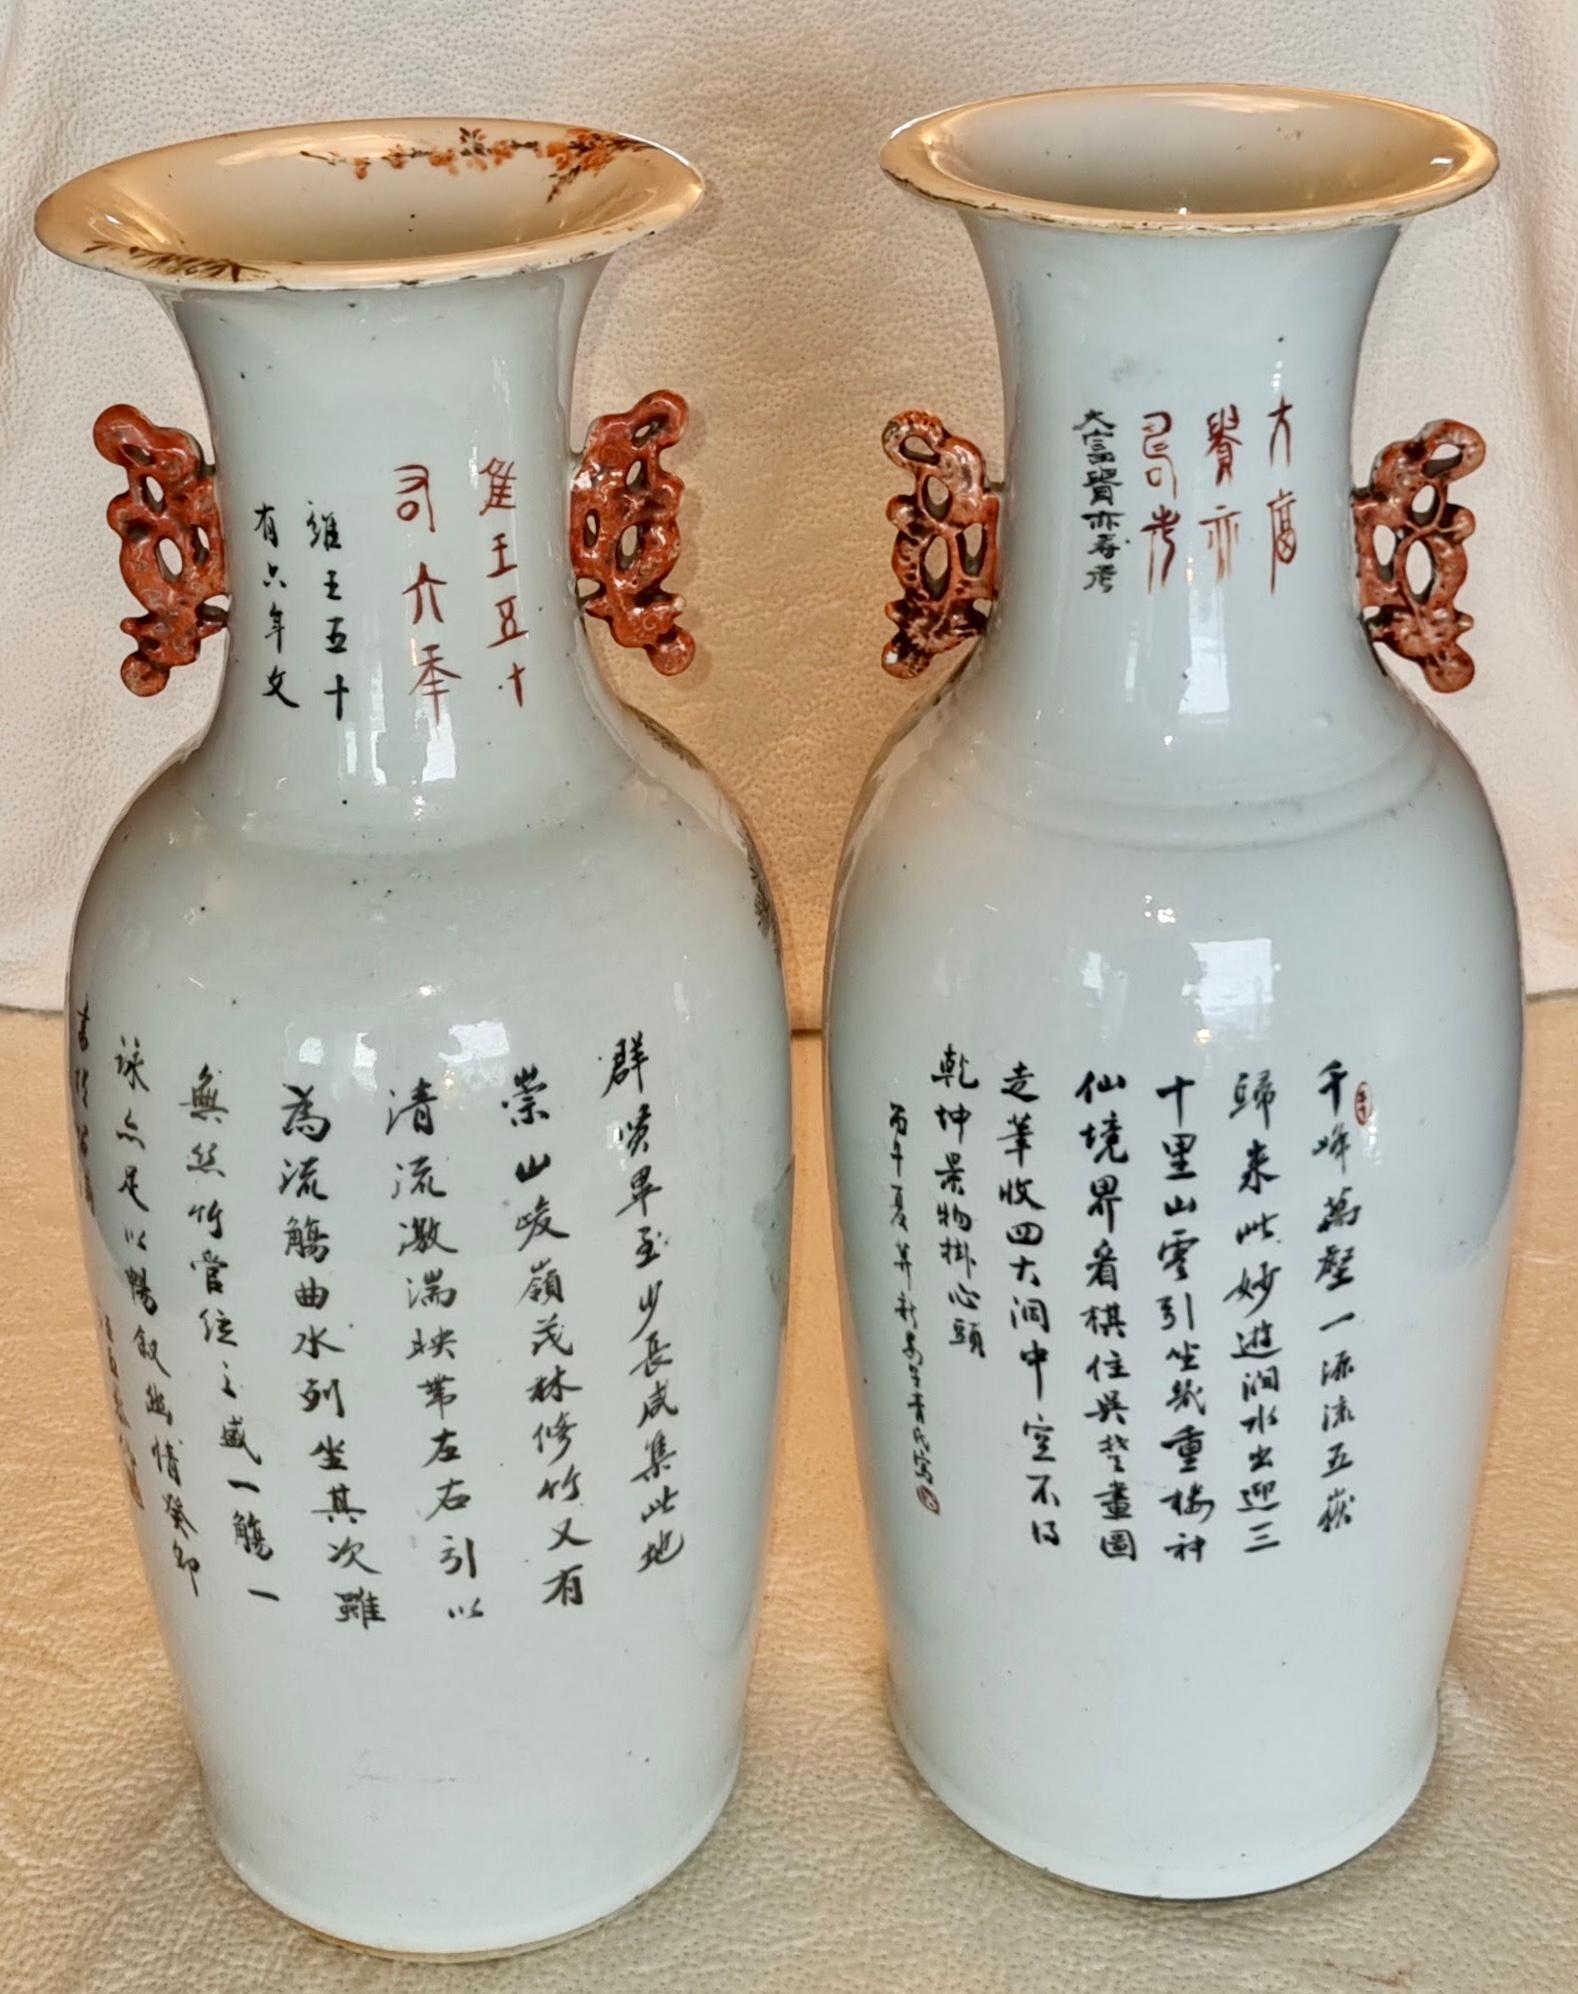 Large 19th Century Chinese Canton Ceramic vases  with signature 
Measures 90x40 cm / 35,50 x 15,75 inches
Strong and very outstanding piece for central decor of living room or main reception area

PRADERA is a second generation of a family run